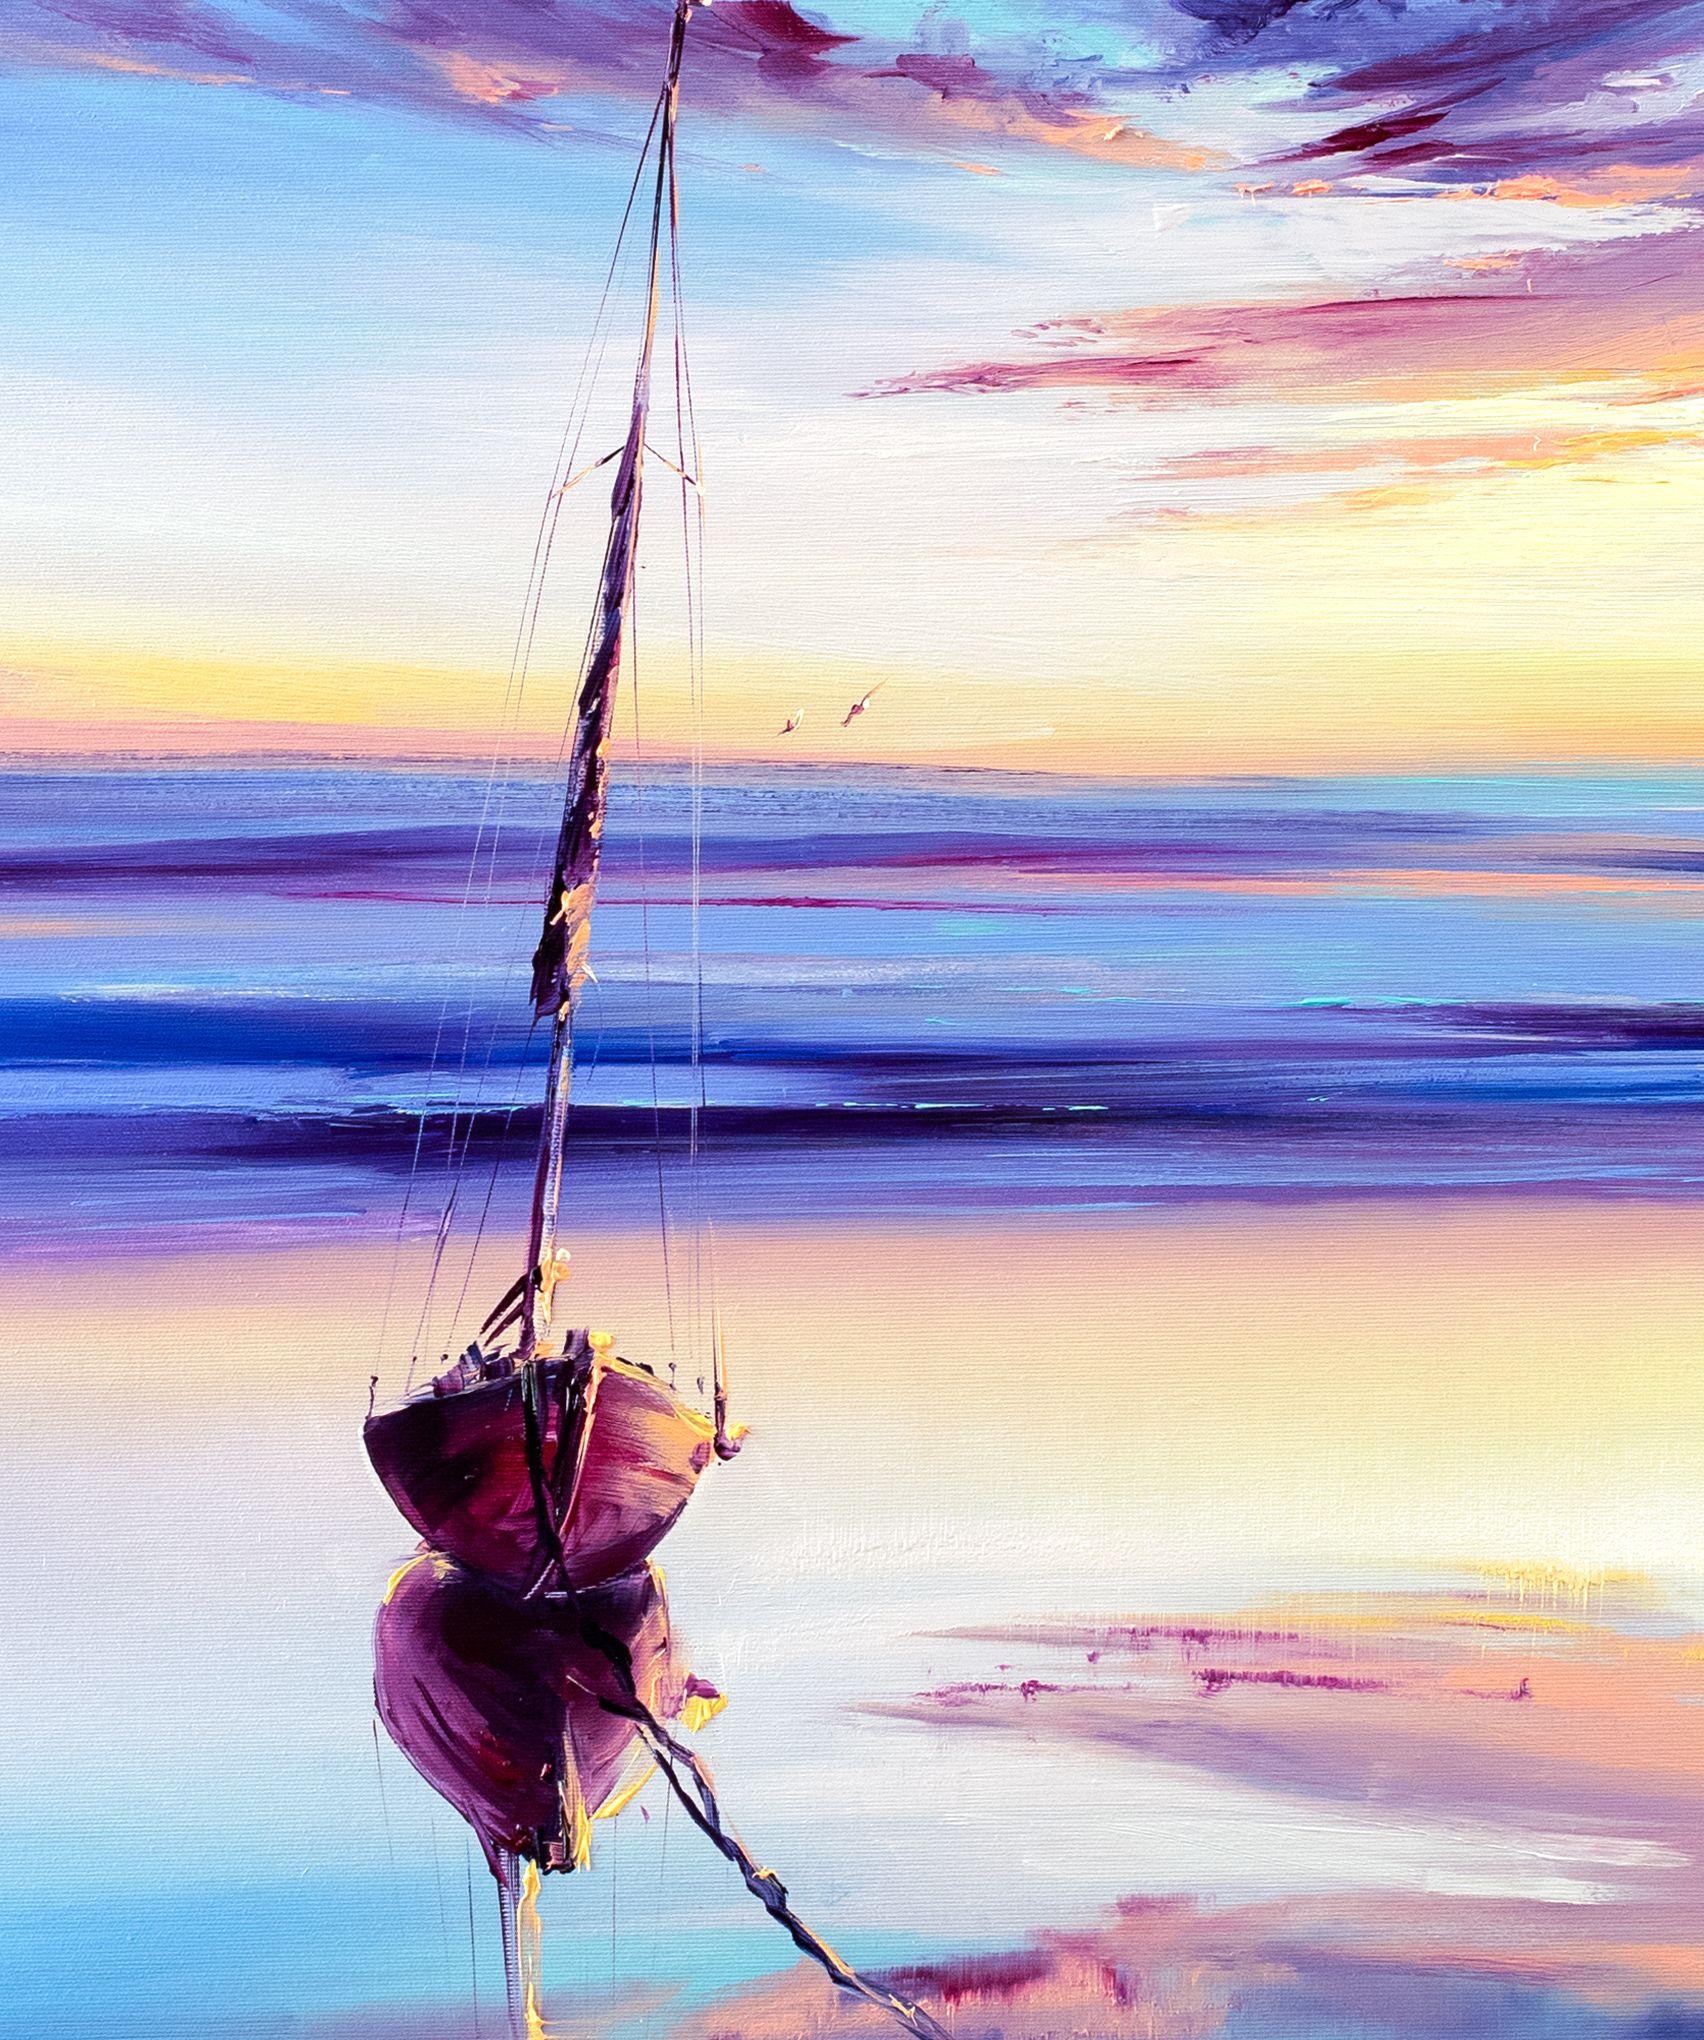 Wishing to convey the feelings of peace, freedom and infinity while exploring colour and movement, the artist shows peaceful moments by the sea.  There is something about the painting that calms the soul. It is not only a painting of the sea, but